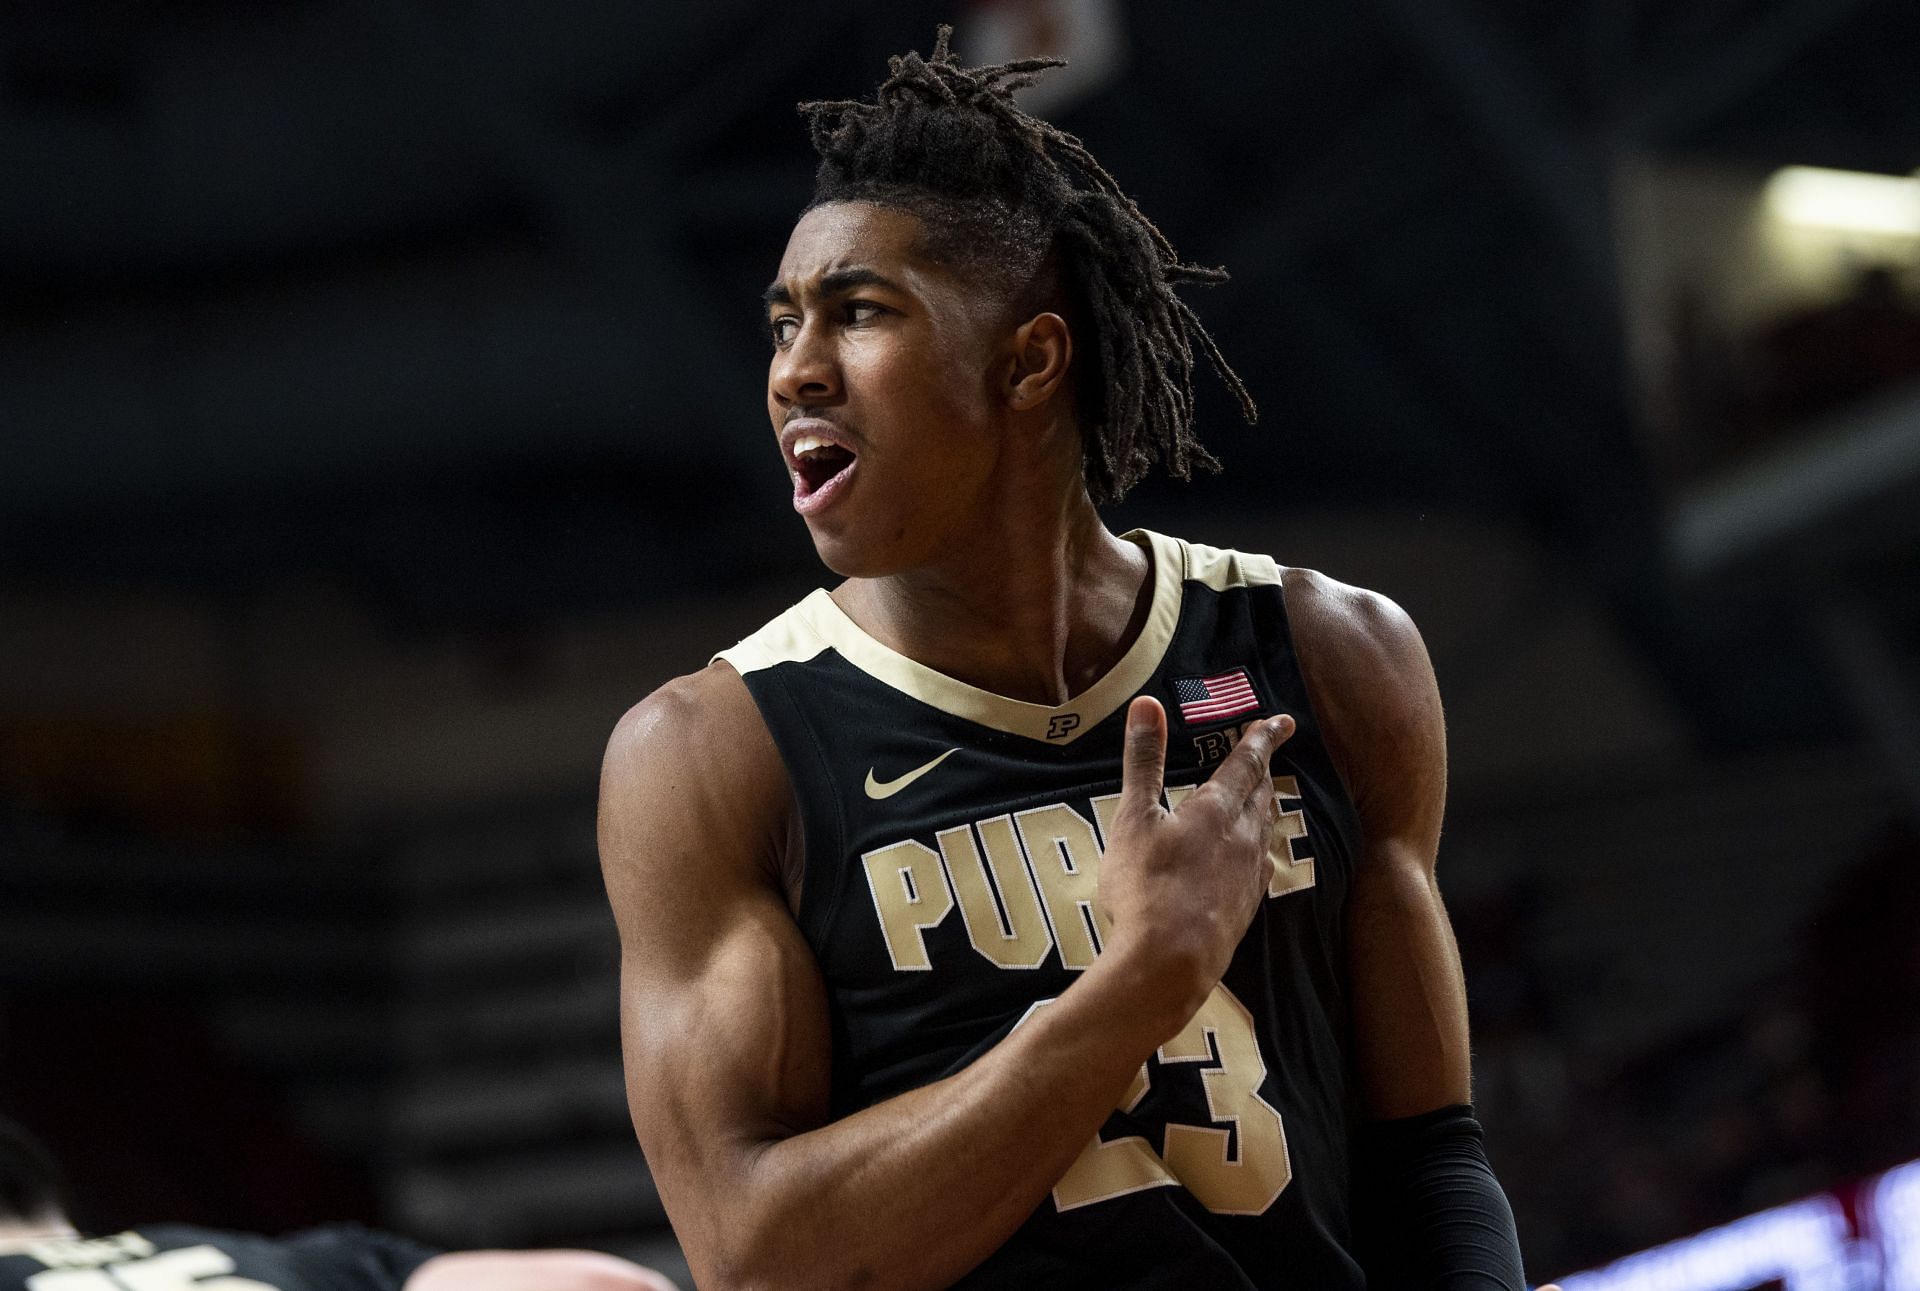 Purdue guard Jaden Ivey continues to buzz in college basketball